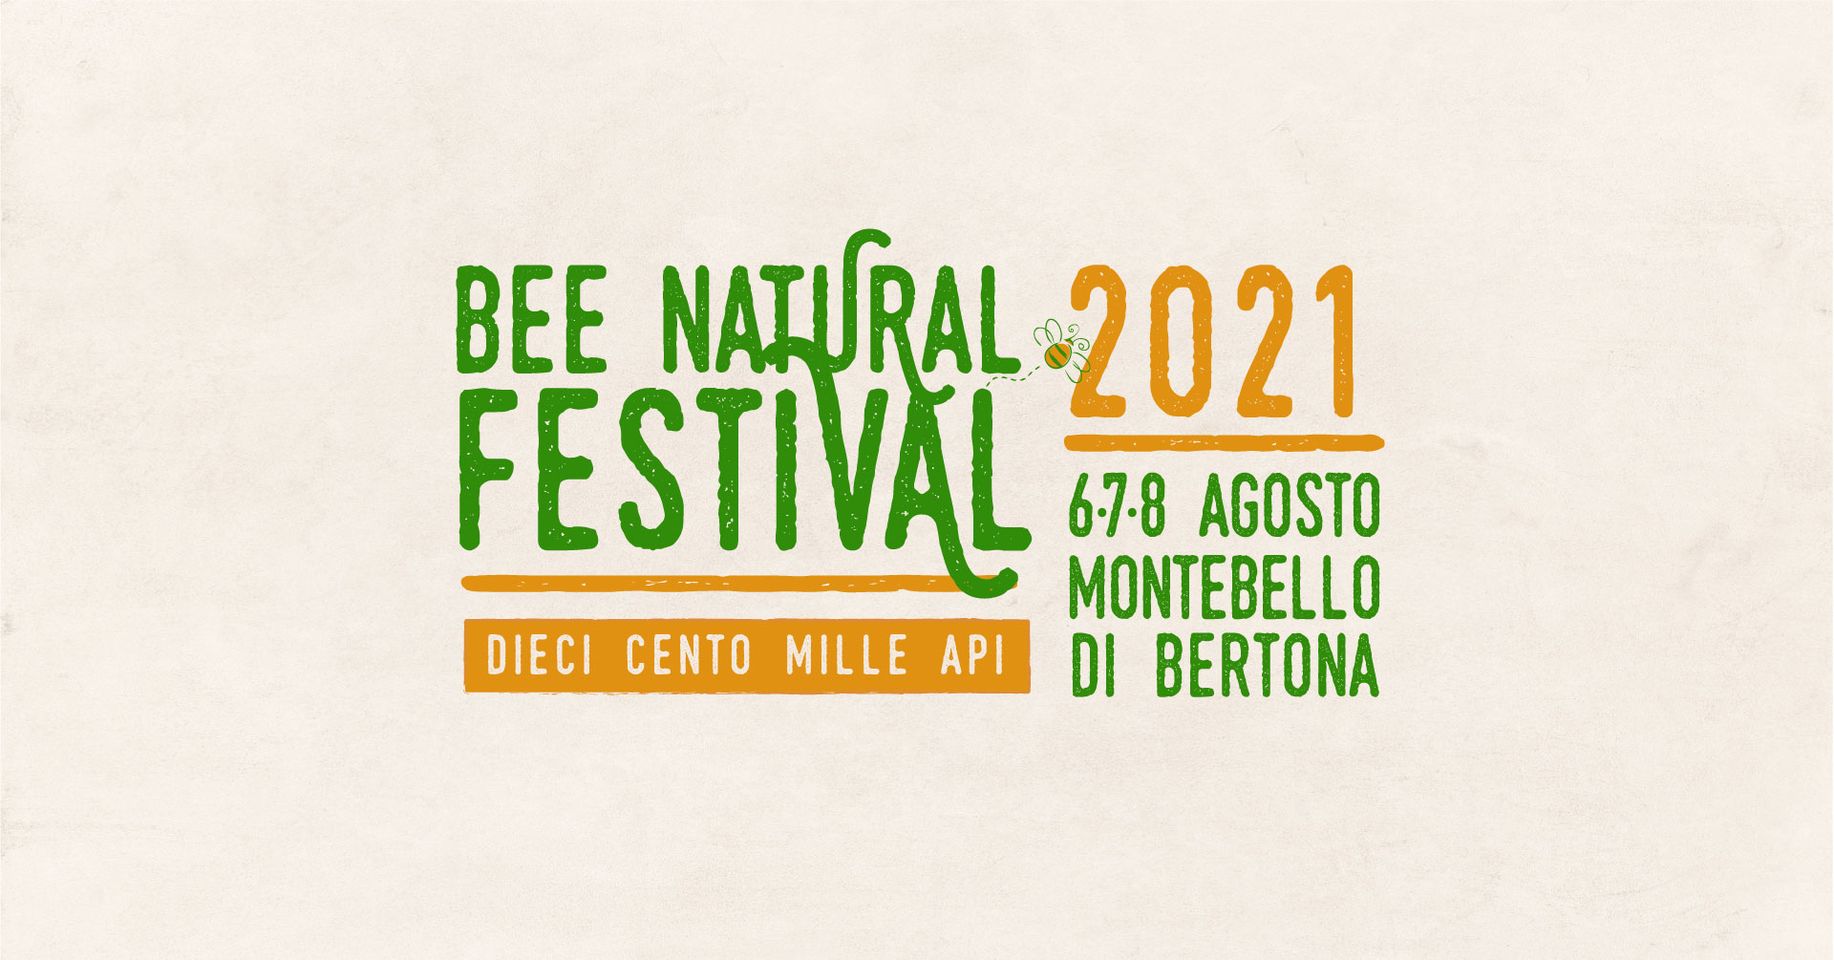 BEE NATURAL FESTIVAL 2021